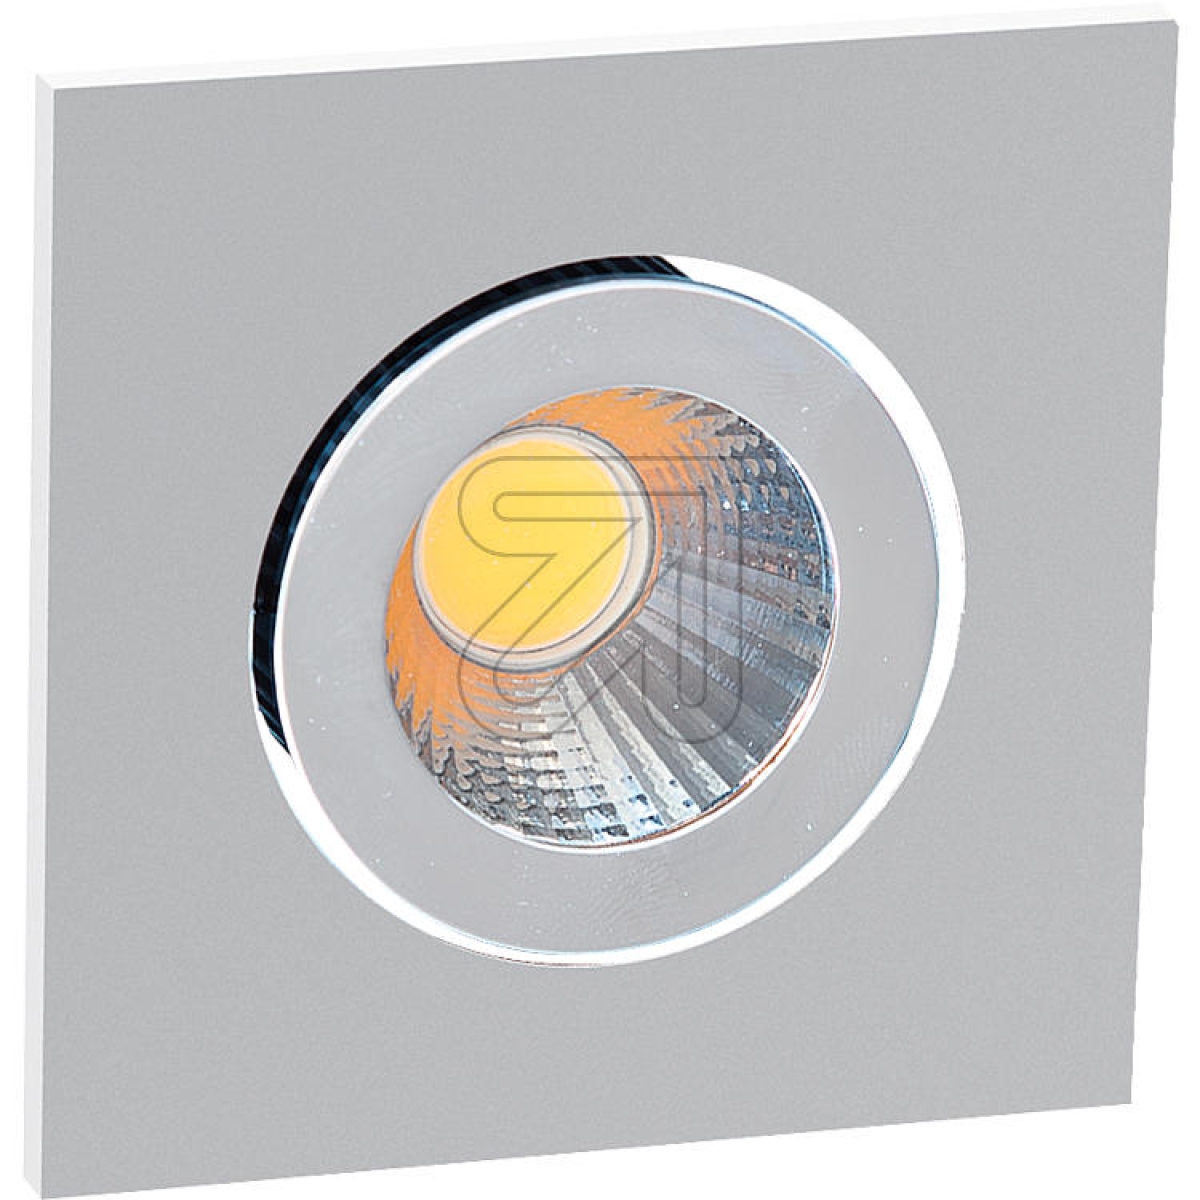 EVNLED recessed light chrome 3000K 8.4W PC24N91102Article-No: 624110